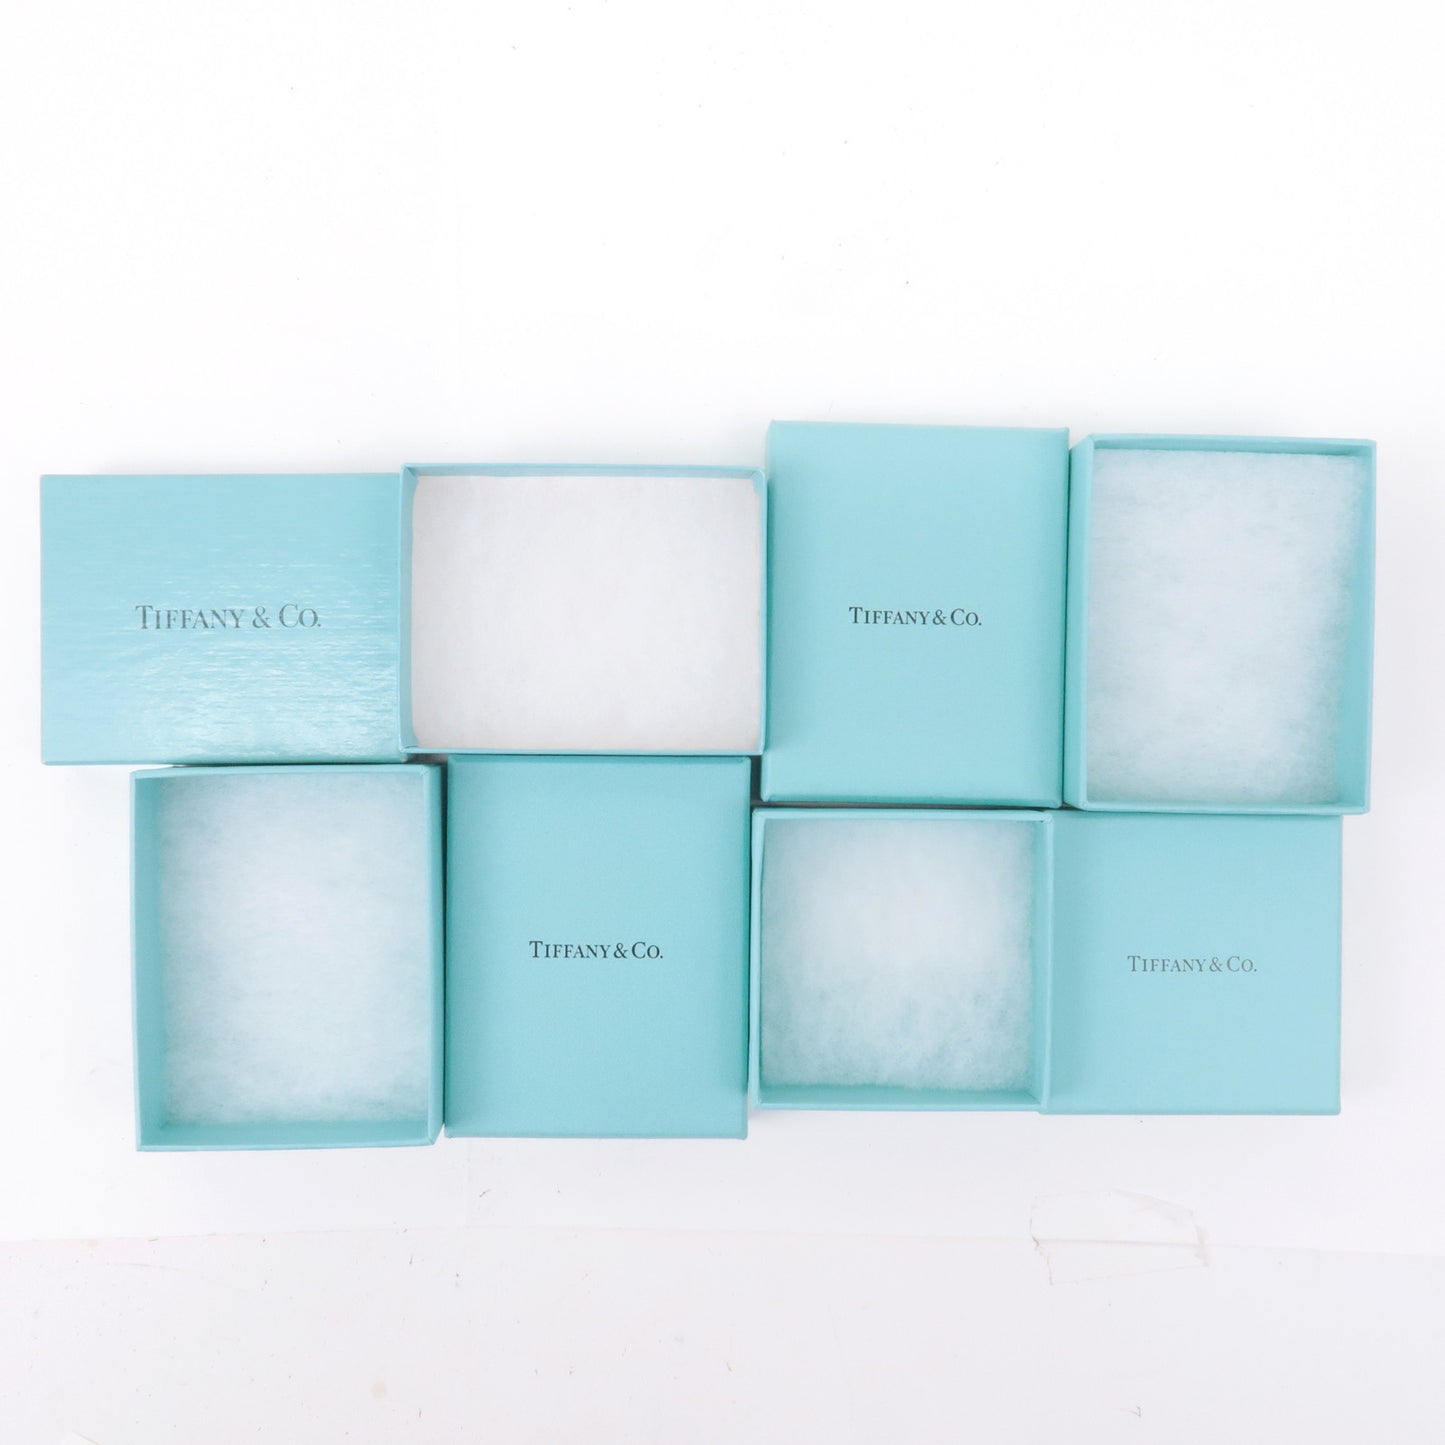 Authentic Tiffany Jewelry Pouch / Dust Bag - different sizes available